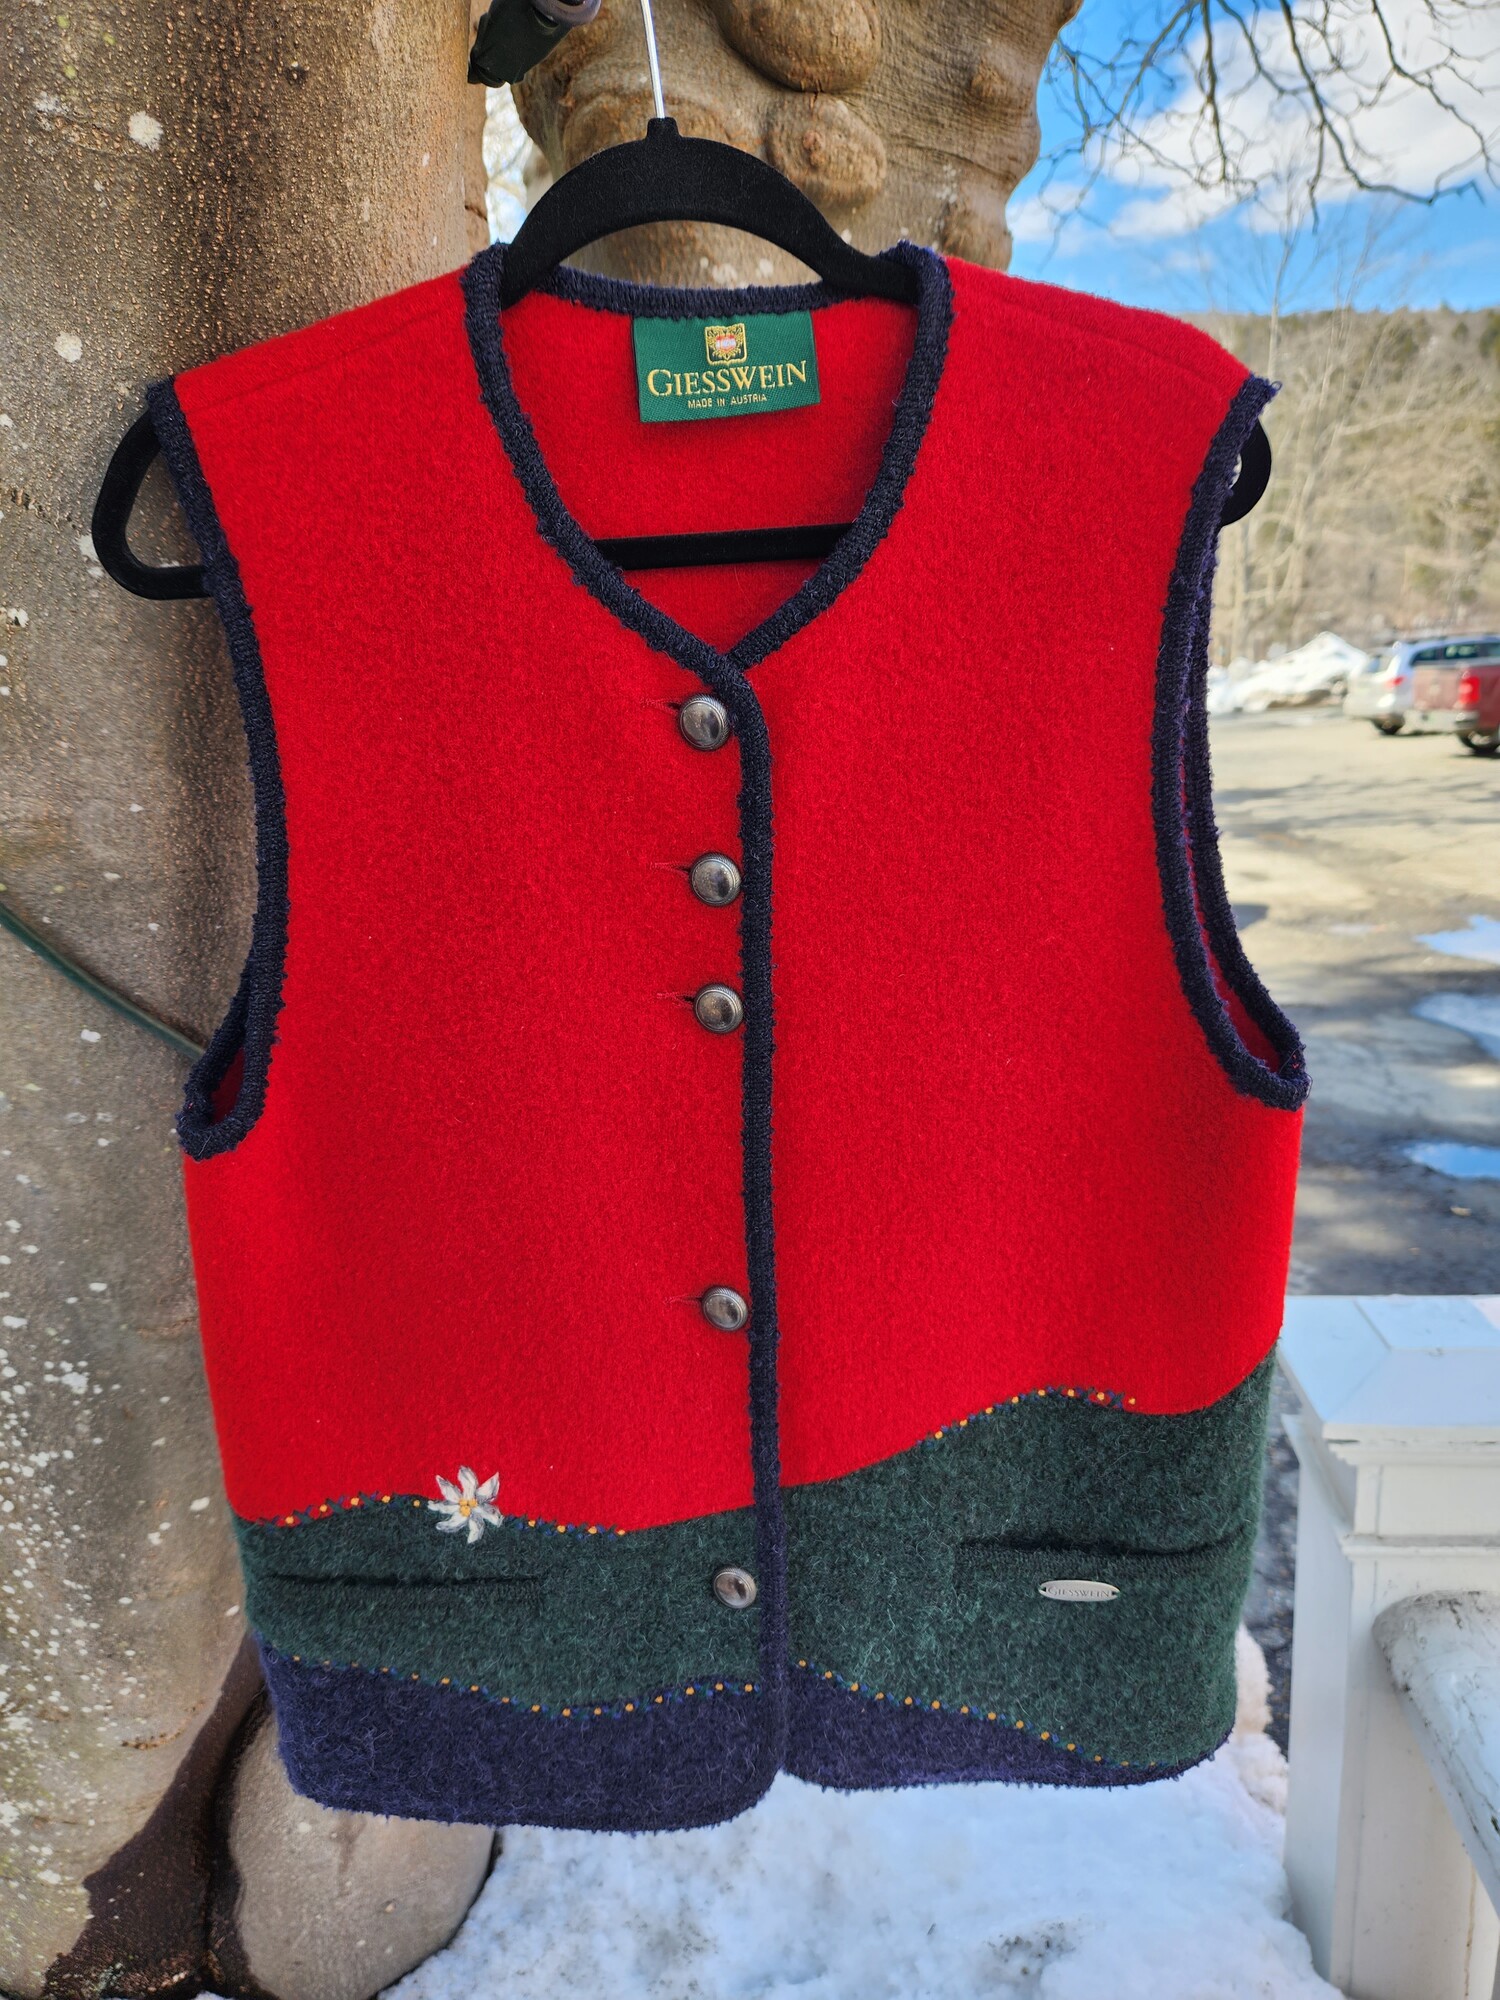 Vintage Giesswein Wool Vest  size L/XL
Red, green and Navy Wool with embroidered flower
Pit to Pit 20.5 inches across
Sleeve opening 10.5 inches
Waist 20.5 inches across
Hip 21 inches across
Down the back 26 inches
EUC